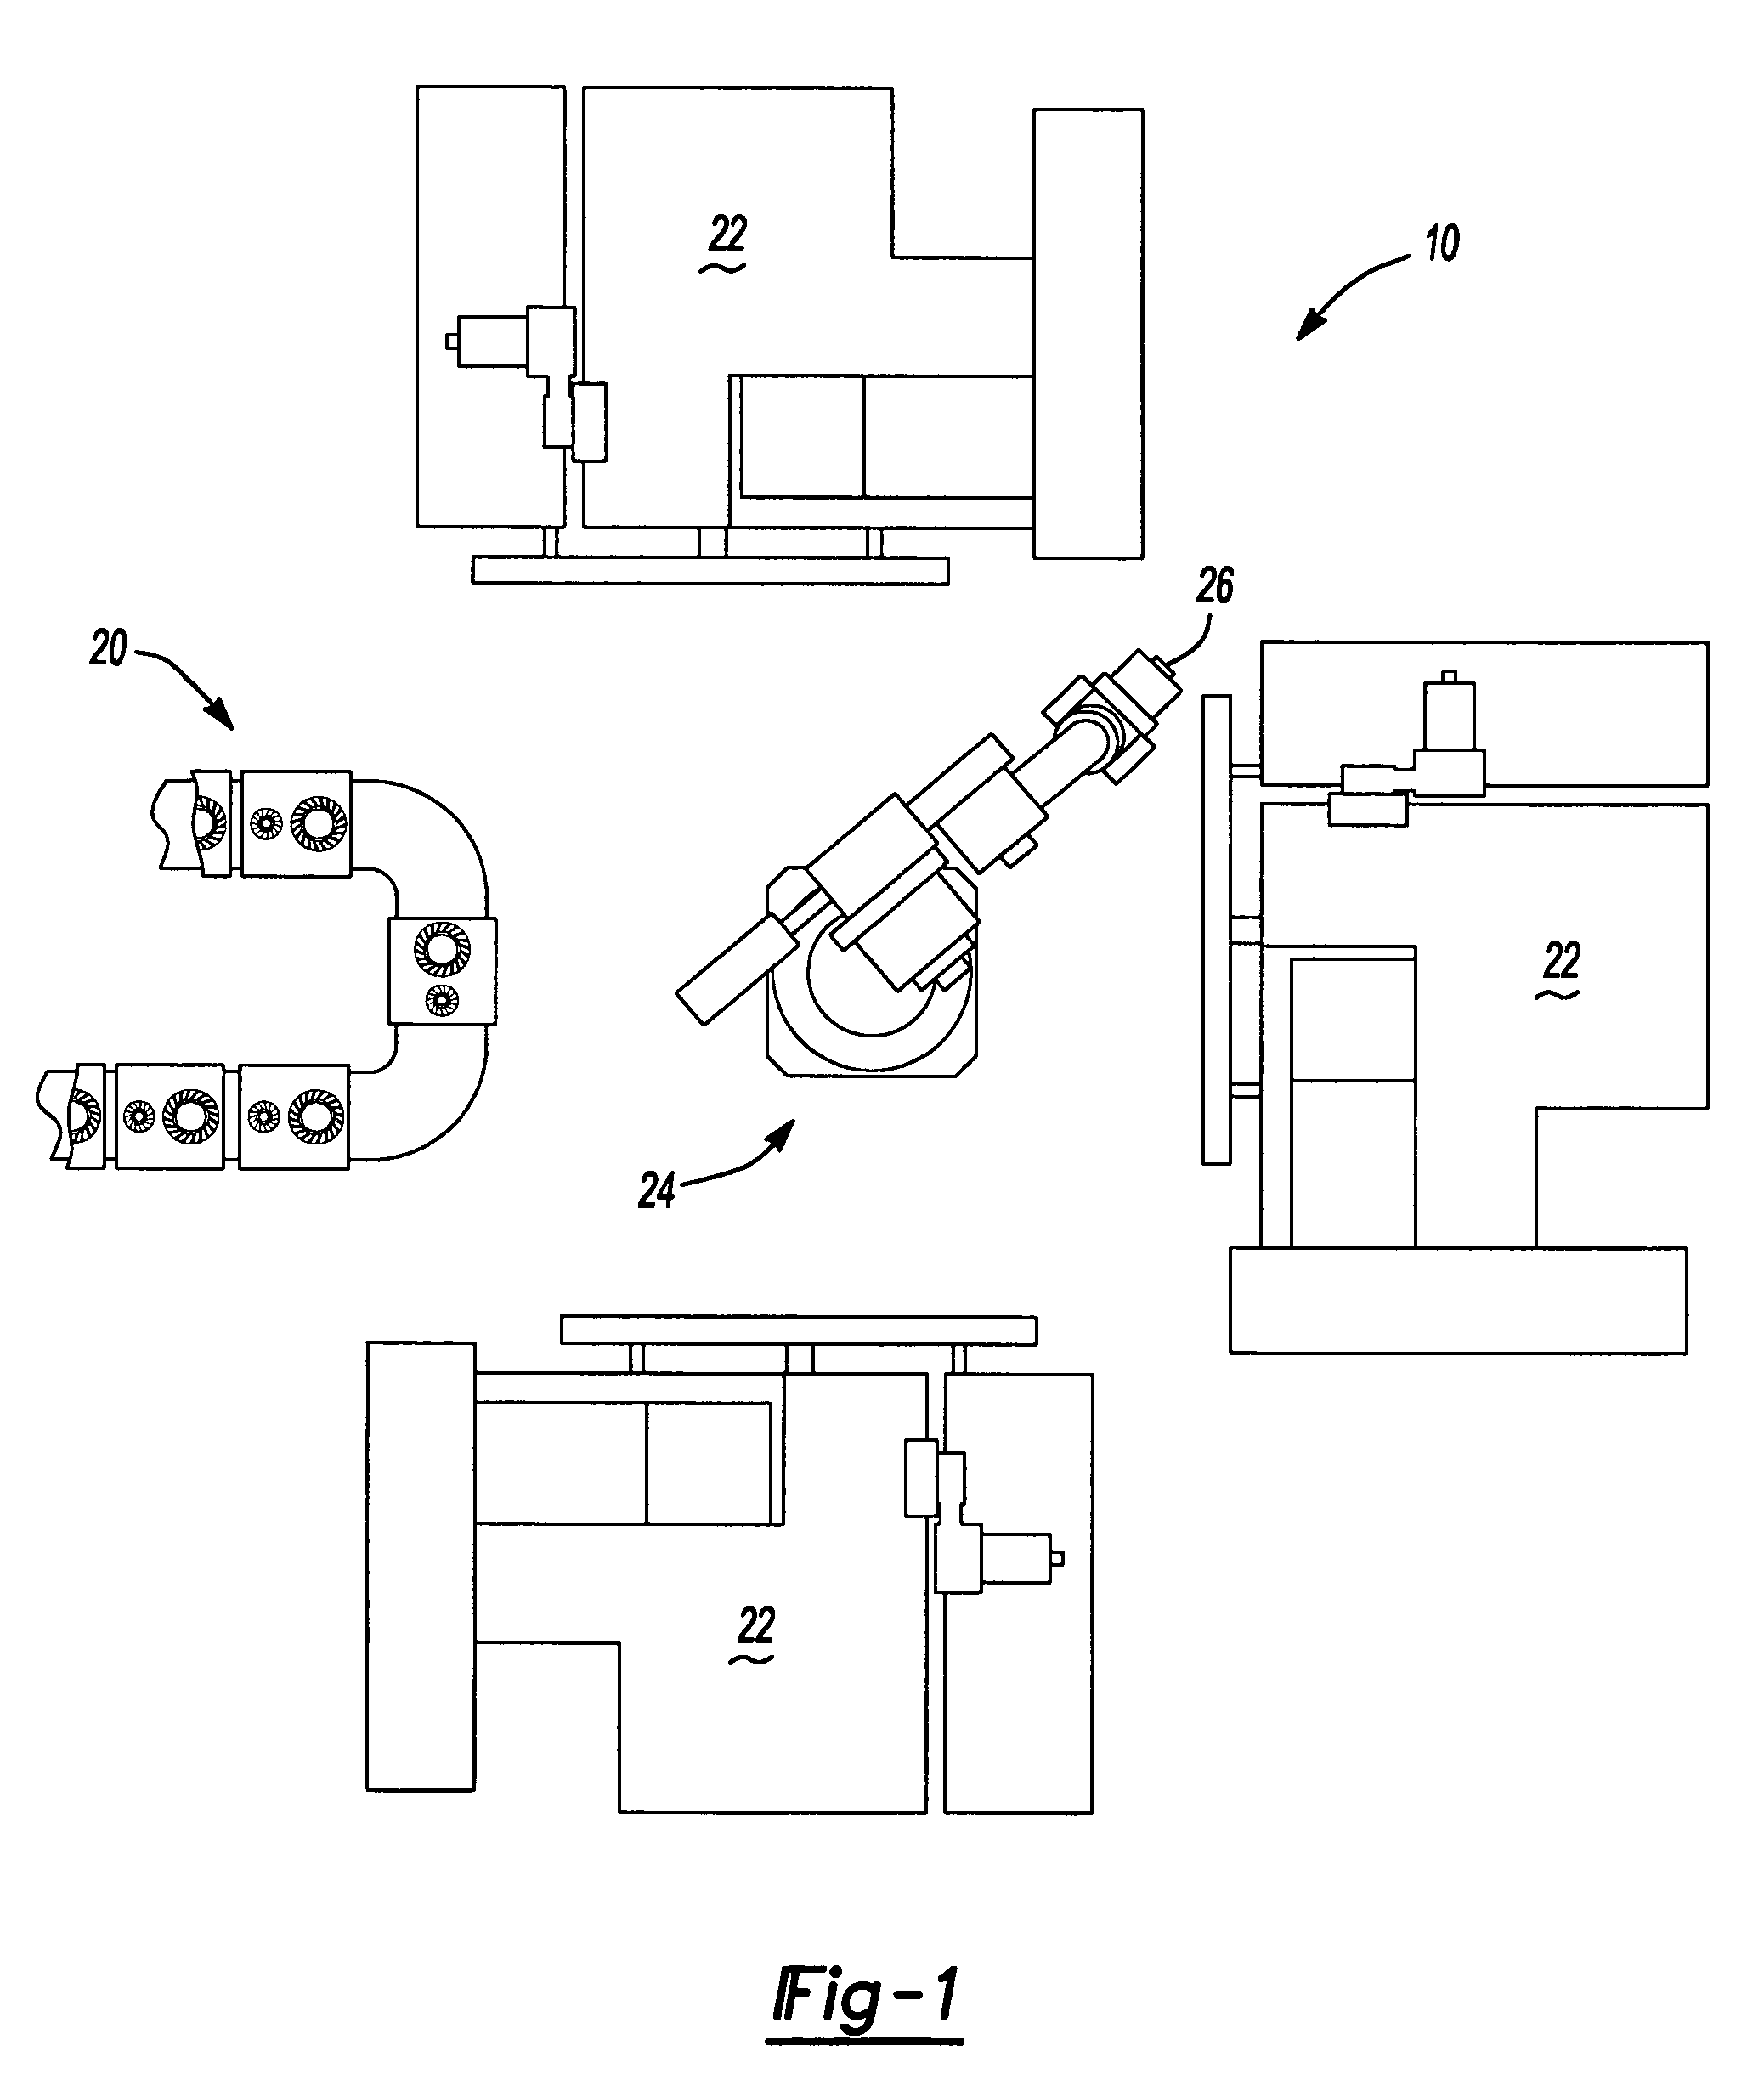 Process for lapping ring and pinion gears